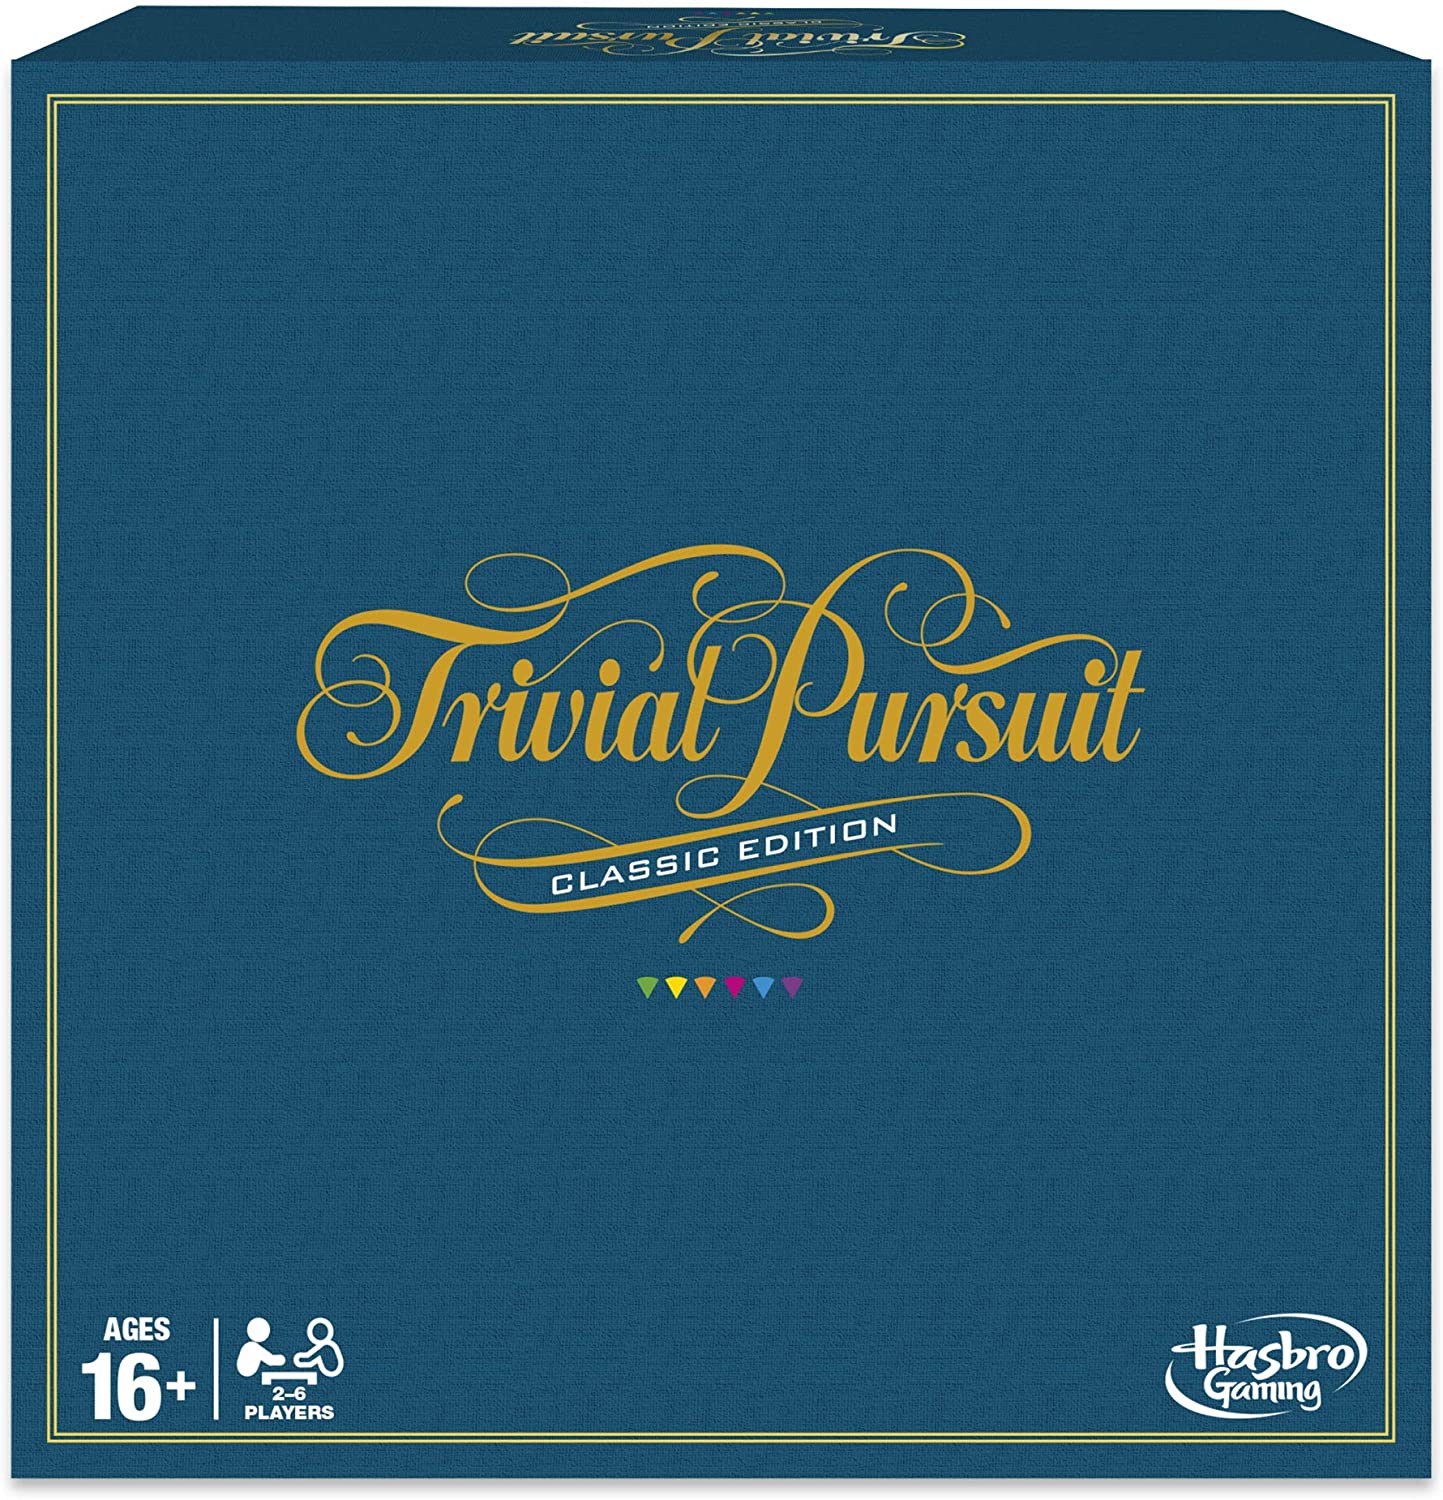 Hasbro Gaming Classic Edition Trivial Pursuit Board Game